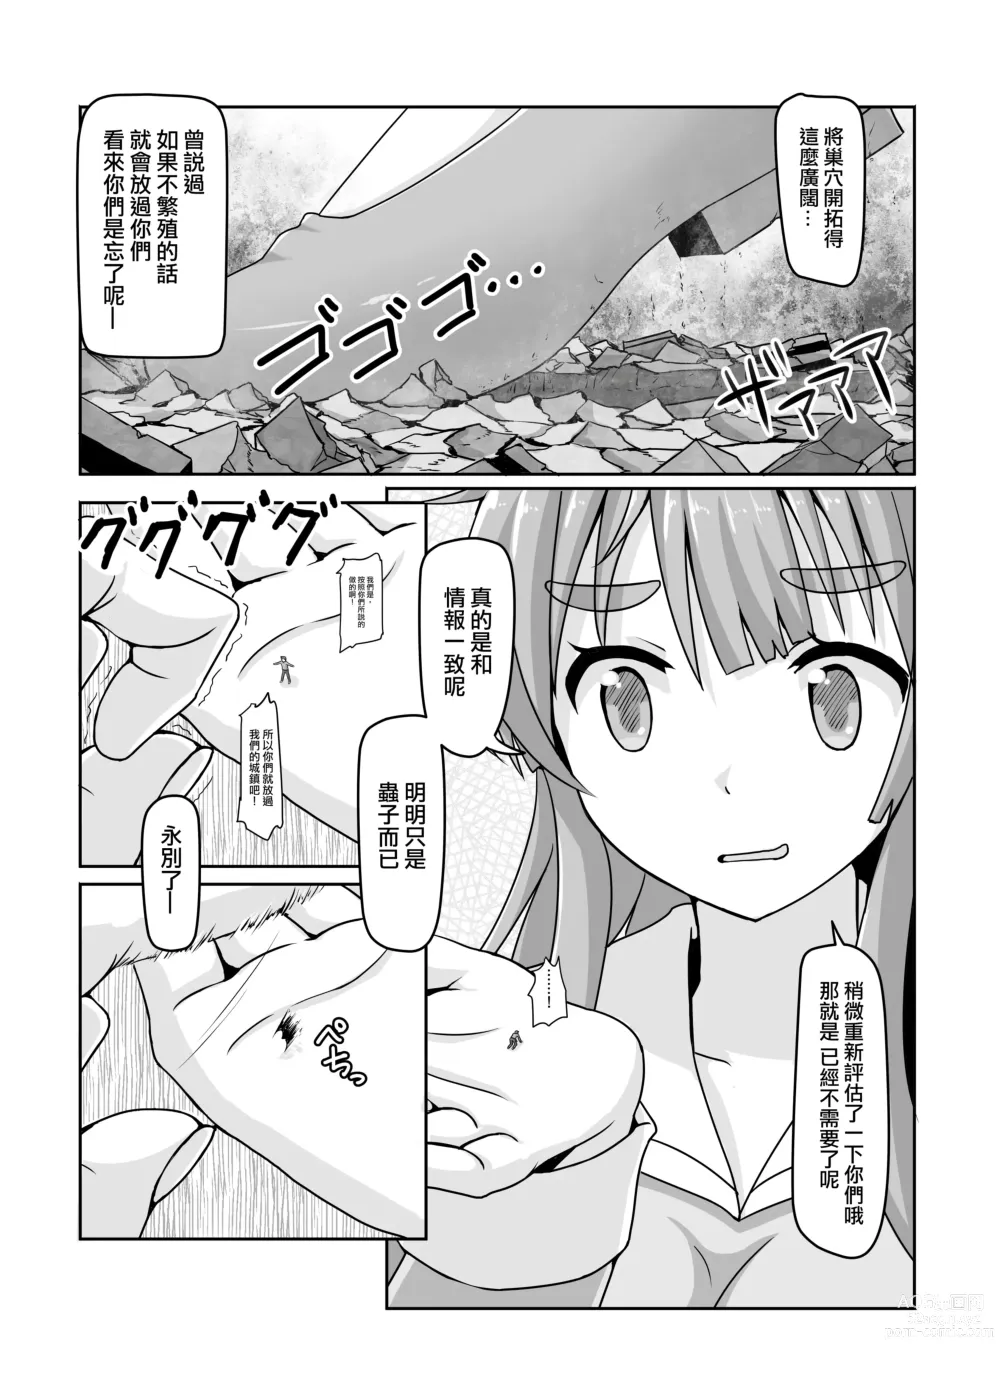 Page 18 of doujinshi 小小人類就由我來衰退